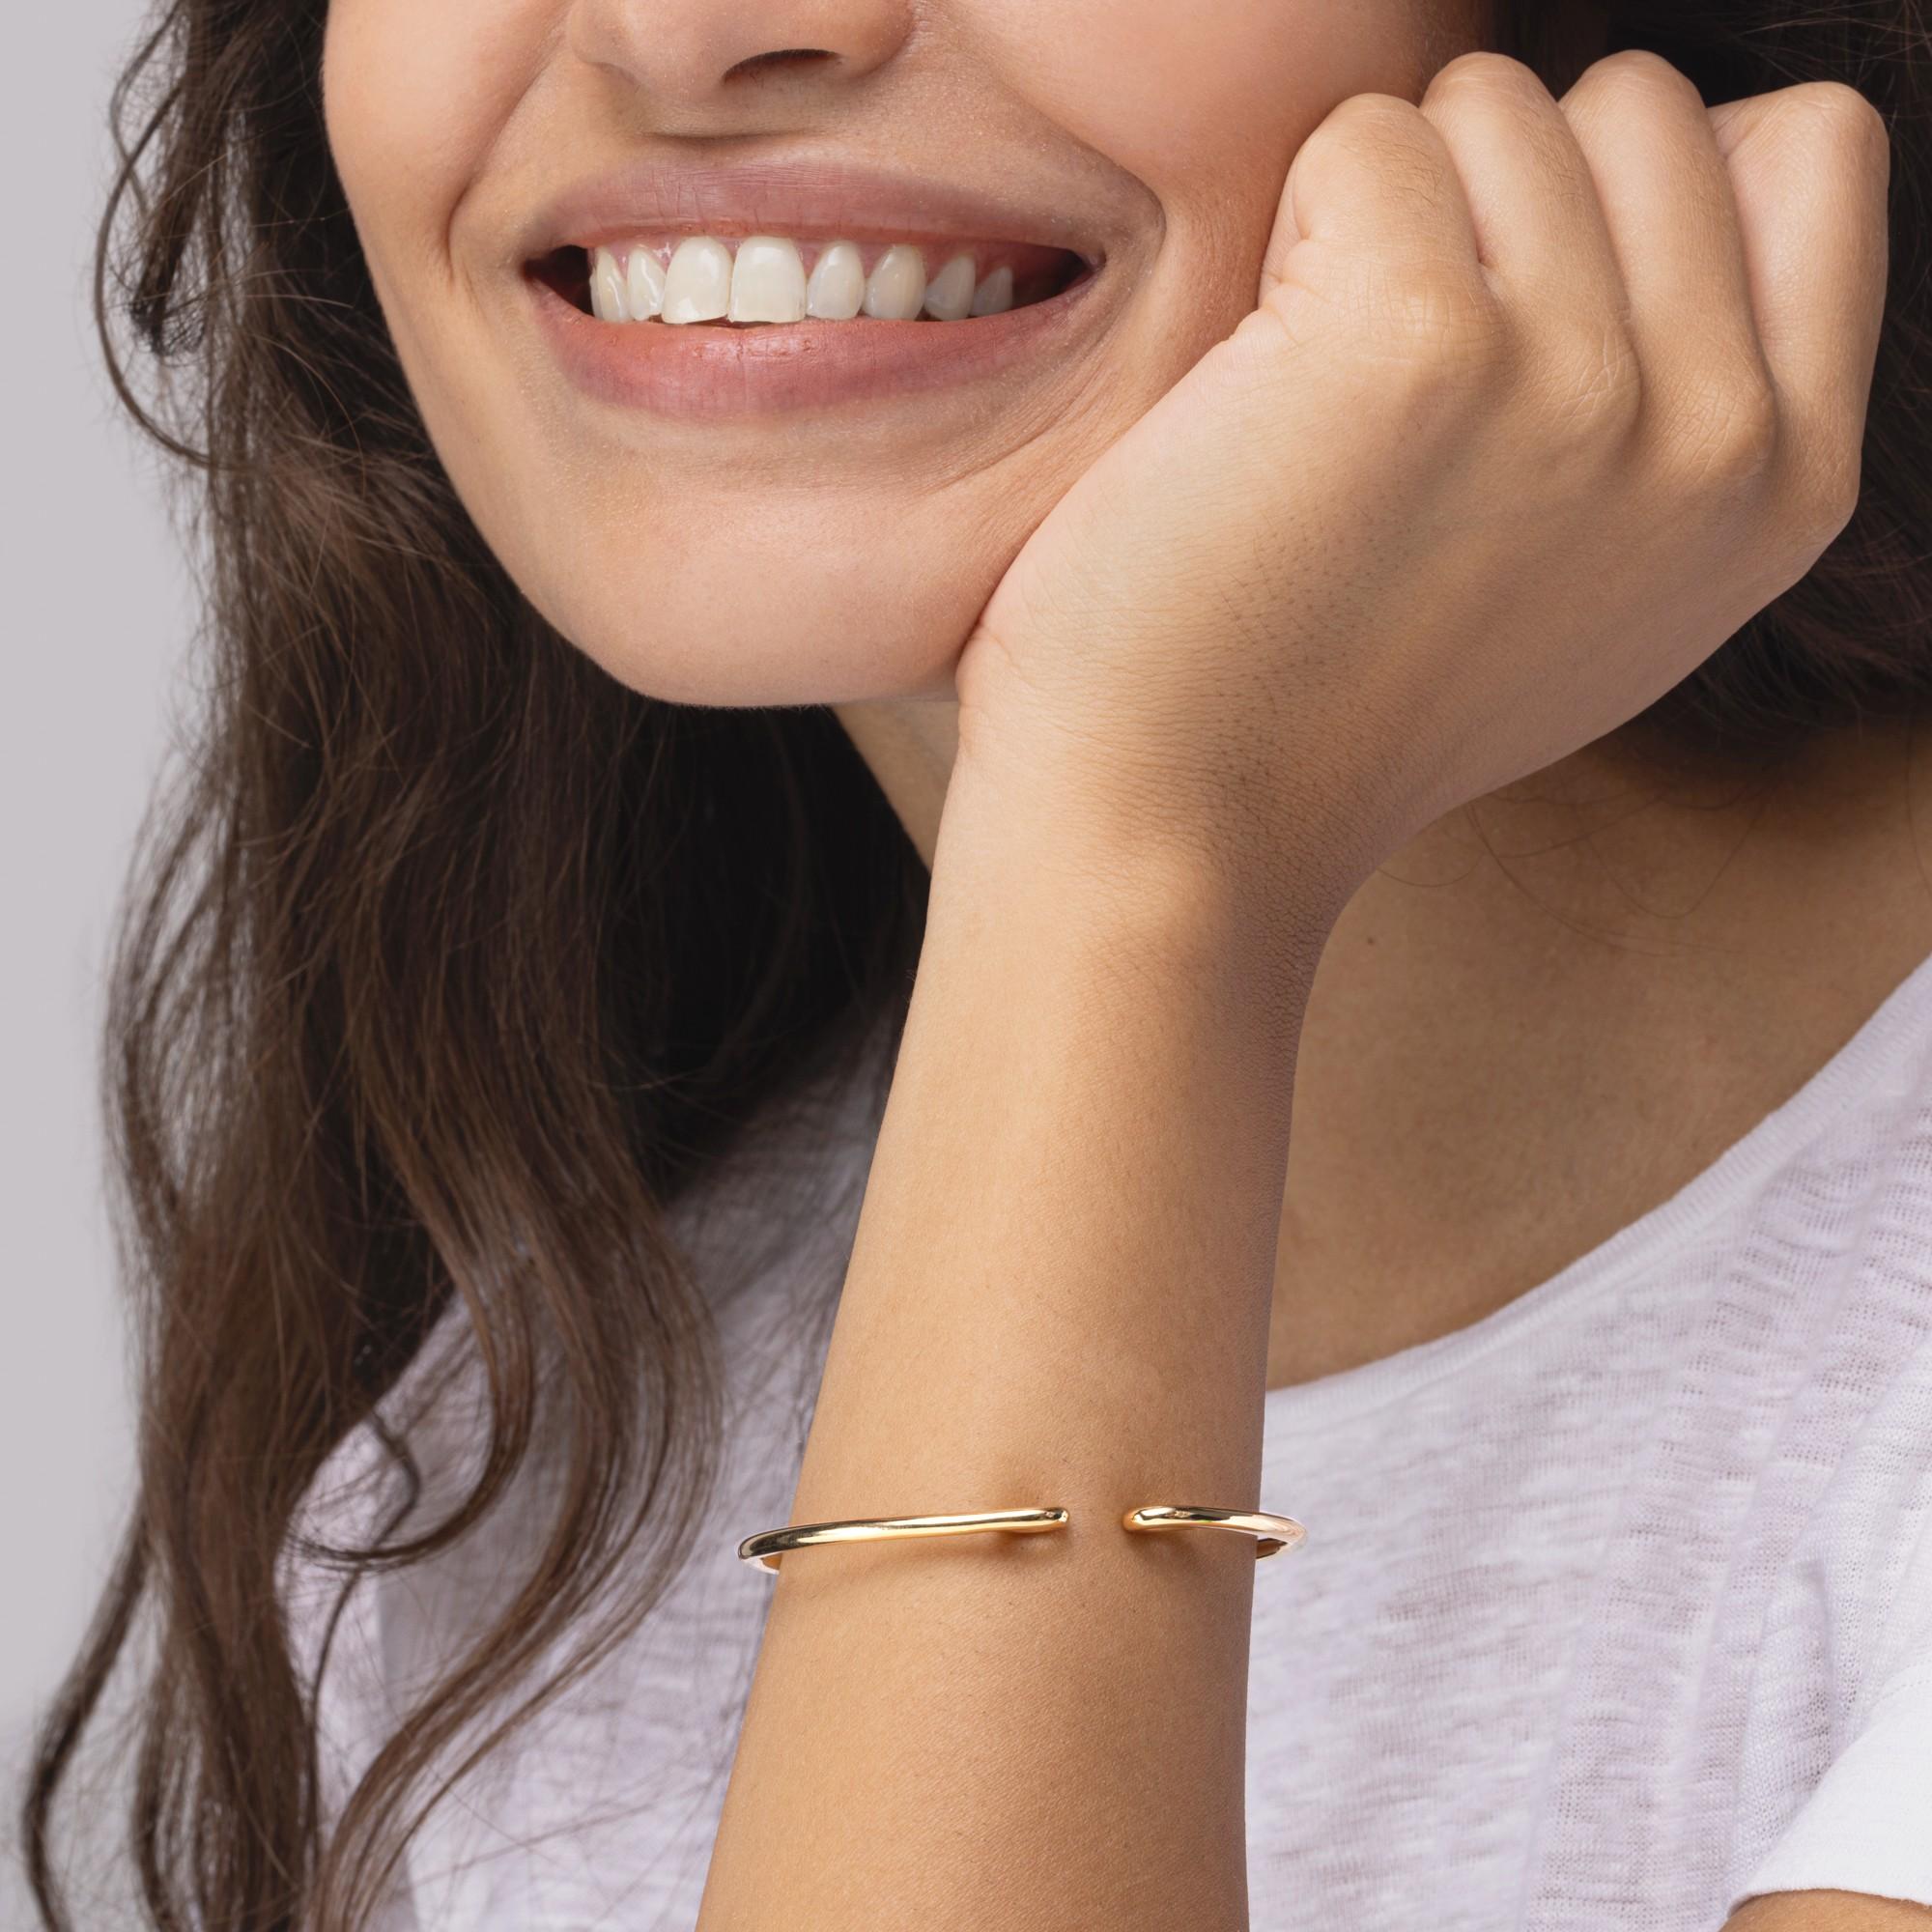 Alex Jona design collection, hand crafted in Italy, 18 karat yellow gold bangle bracelet.

Alex Jona jewels stand out, not only for their special design and for the excellent quality of the gemstones, but also for the careful attention given to